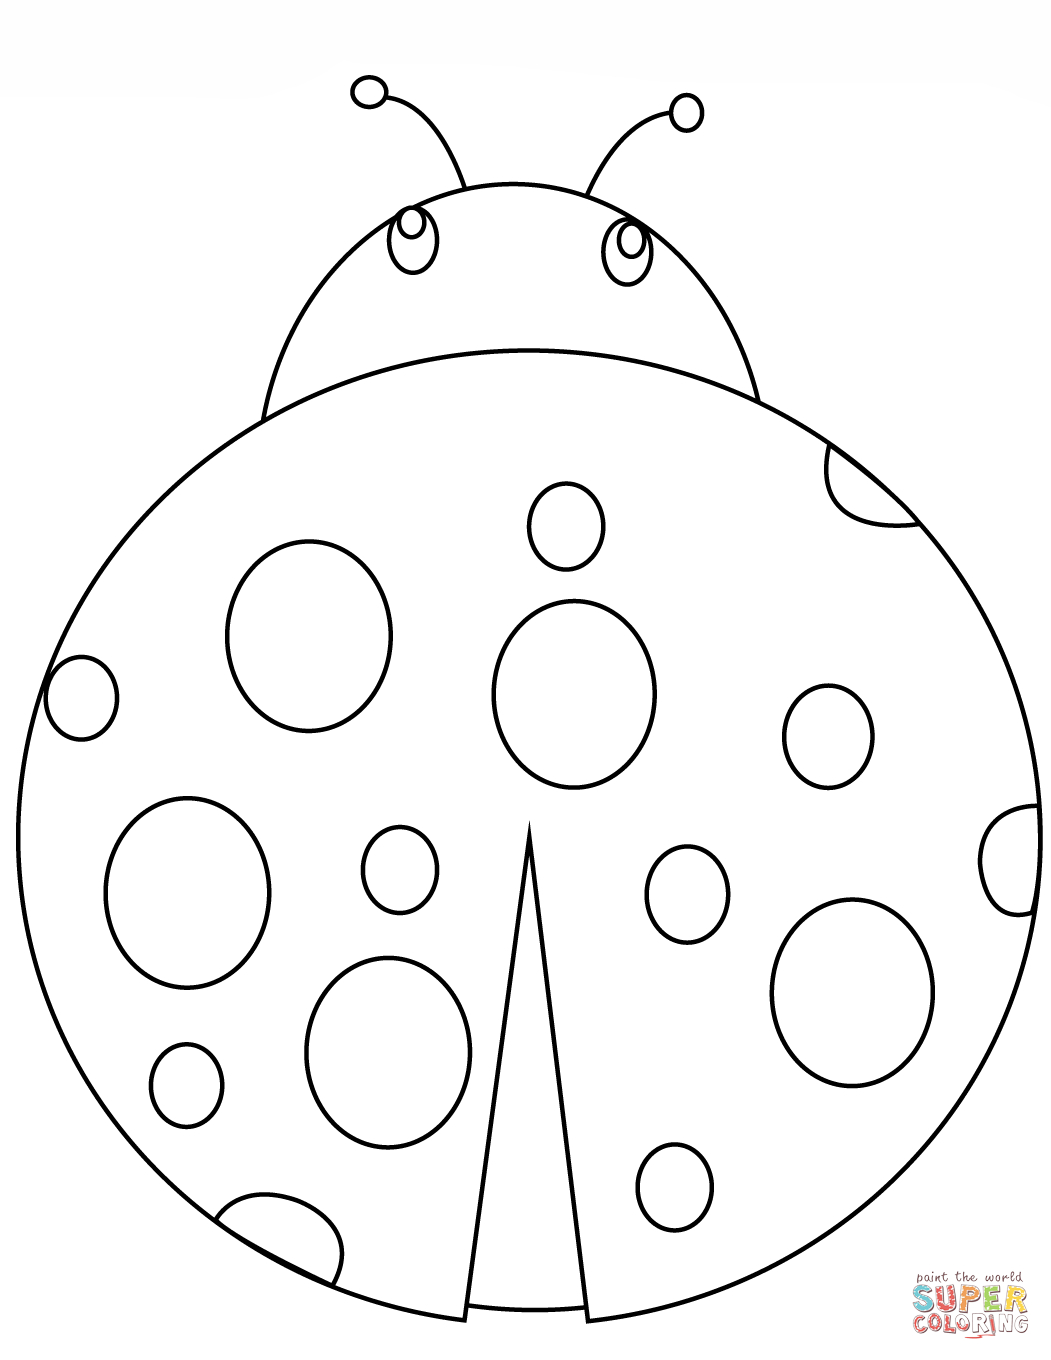 Bug Coloring Pages For Kids Ladybug Coloring Pages Free Coloring Pages